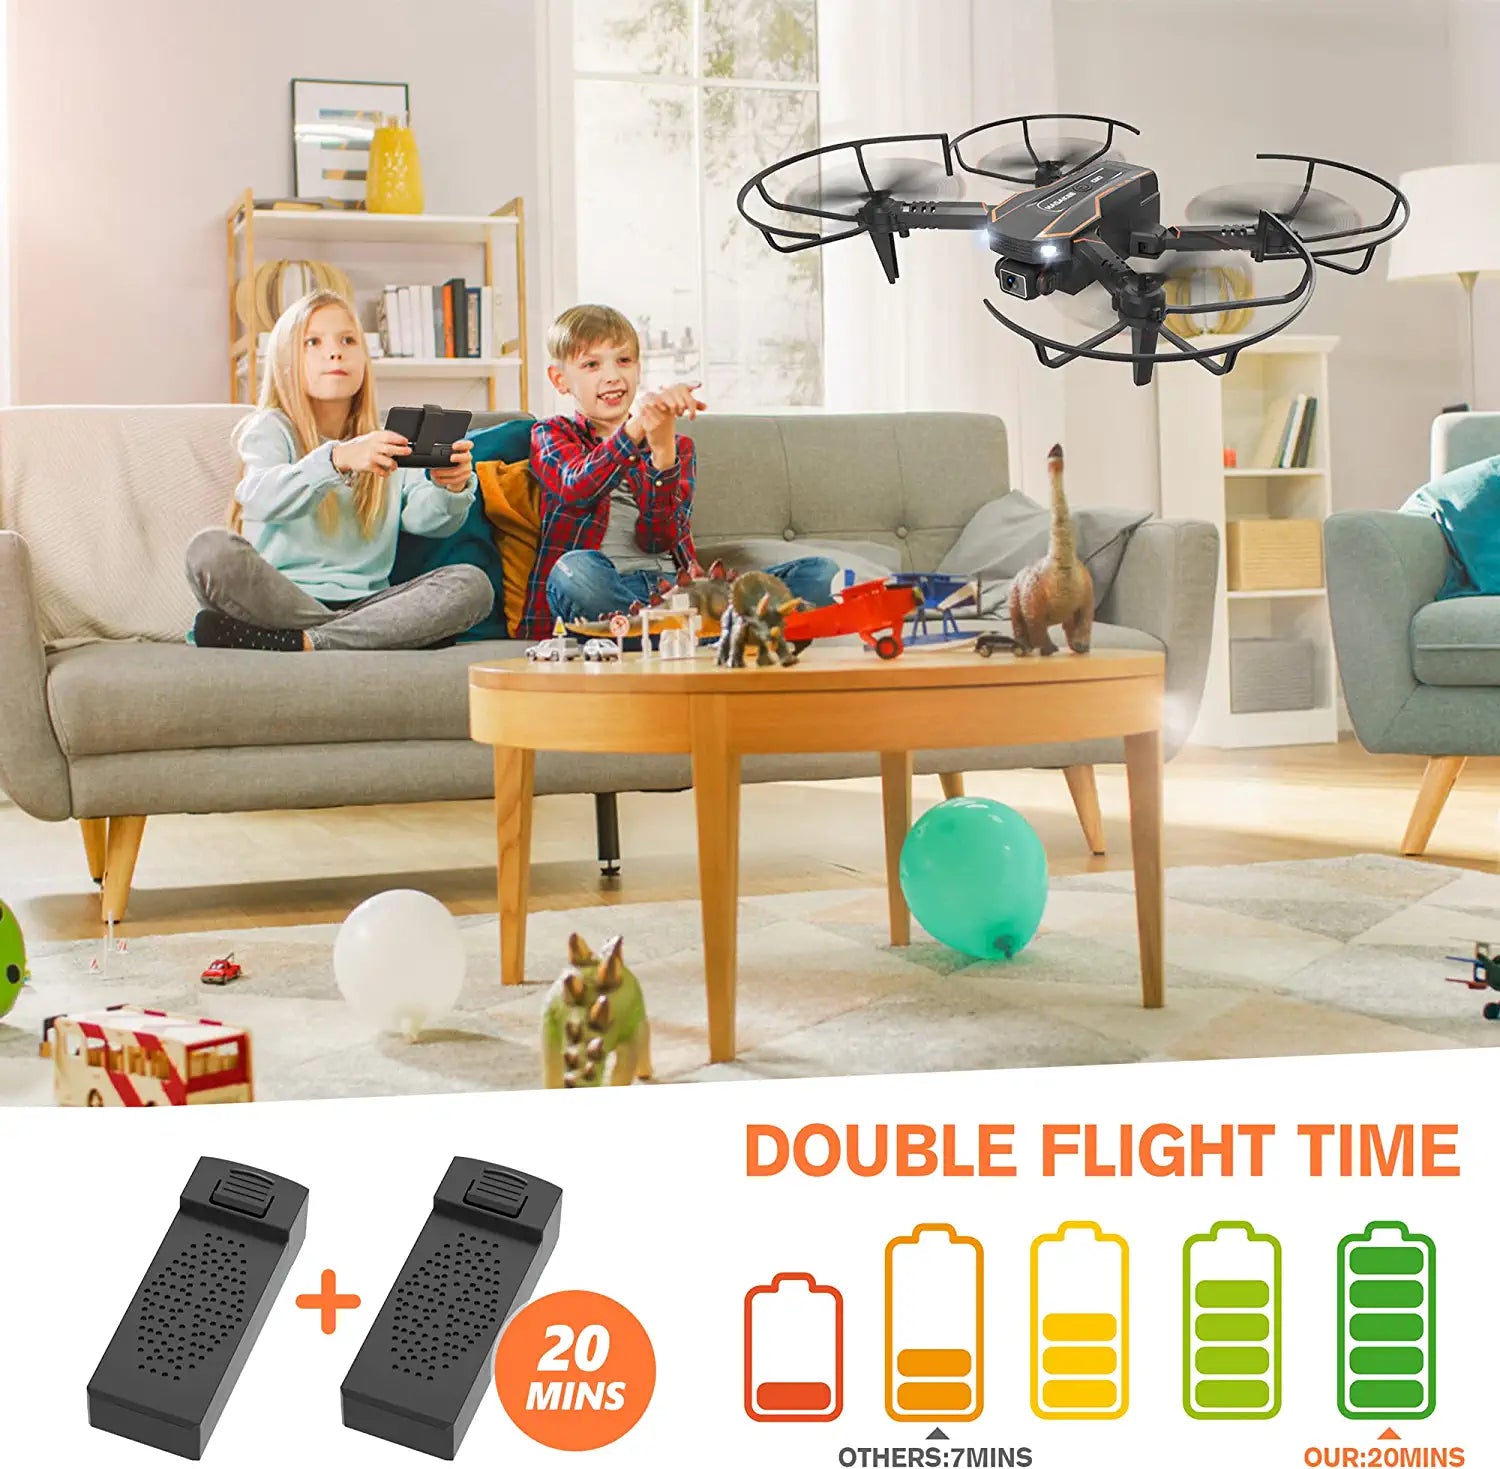 AVIALOGIC Mini Drone - with Camera for Kids, Remote Control Helicopter Toys Gifts for Boys Girls, FPV RC Quadcopter with 1080P HD Live Video Camera, Altitude Hold, Gravity Control, 2 Batteries - RCDrone